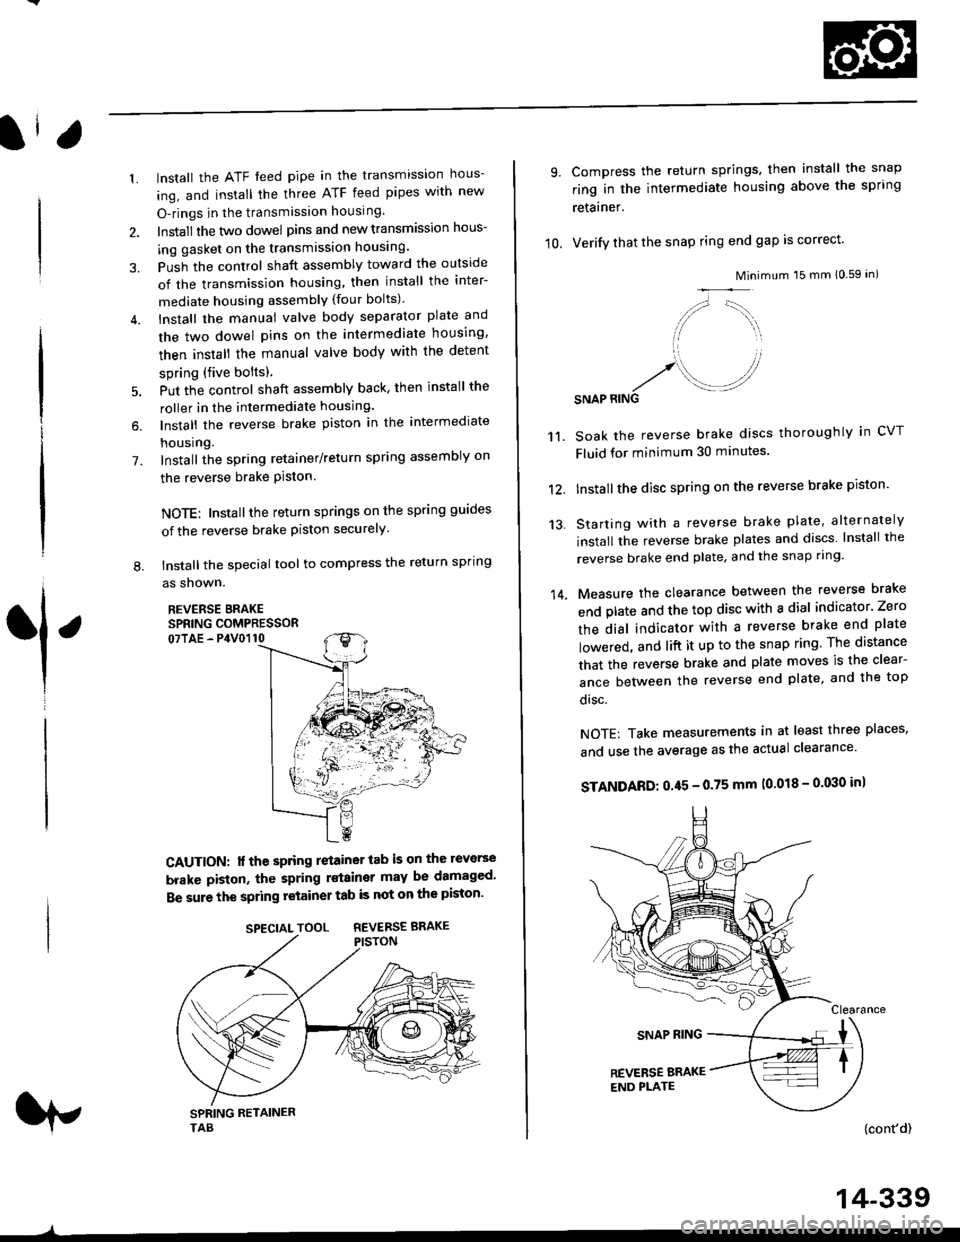 HONDA CIVIC 1999 6.G Workshop Manual 1.
7.
lnstall the ATF feed pipe in the transmission hous-
ing, and install the three ATF feed pipes with new
O-rings in the transmission housing,
Install the two dowel pins and new transmission hous-
